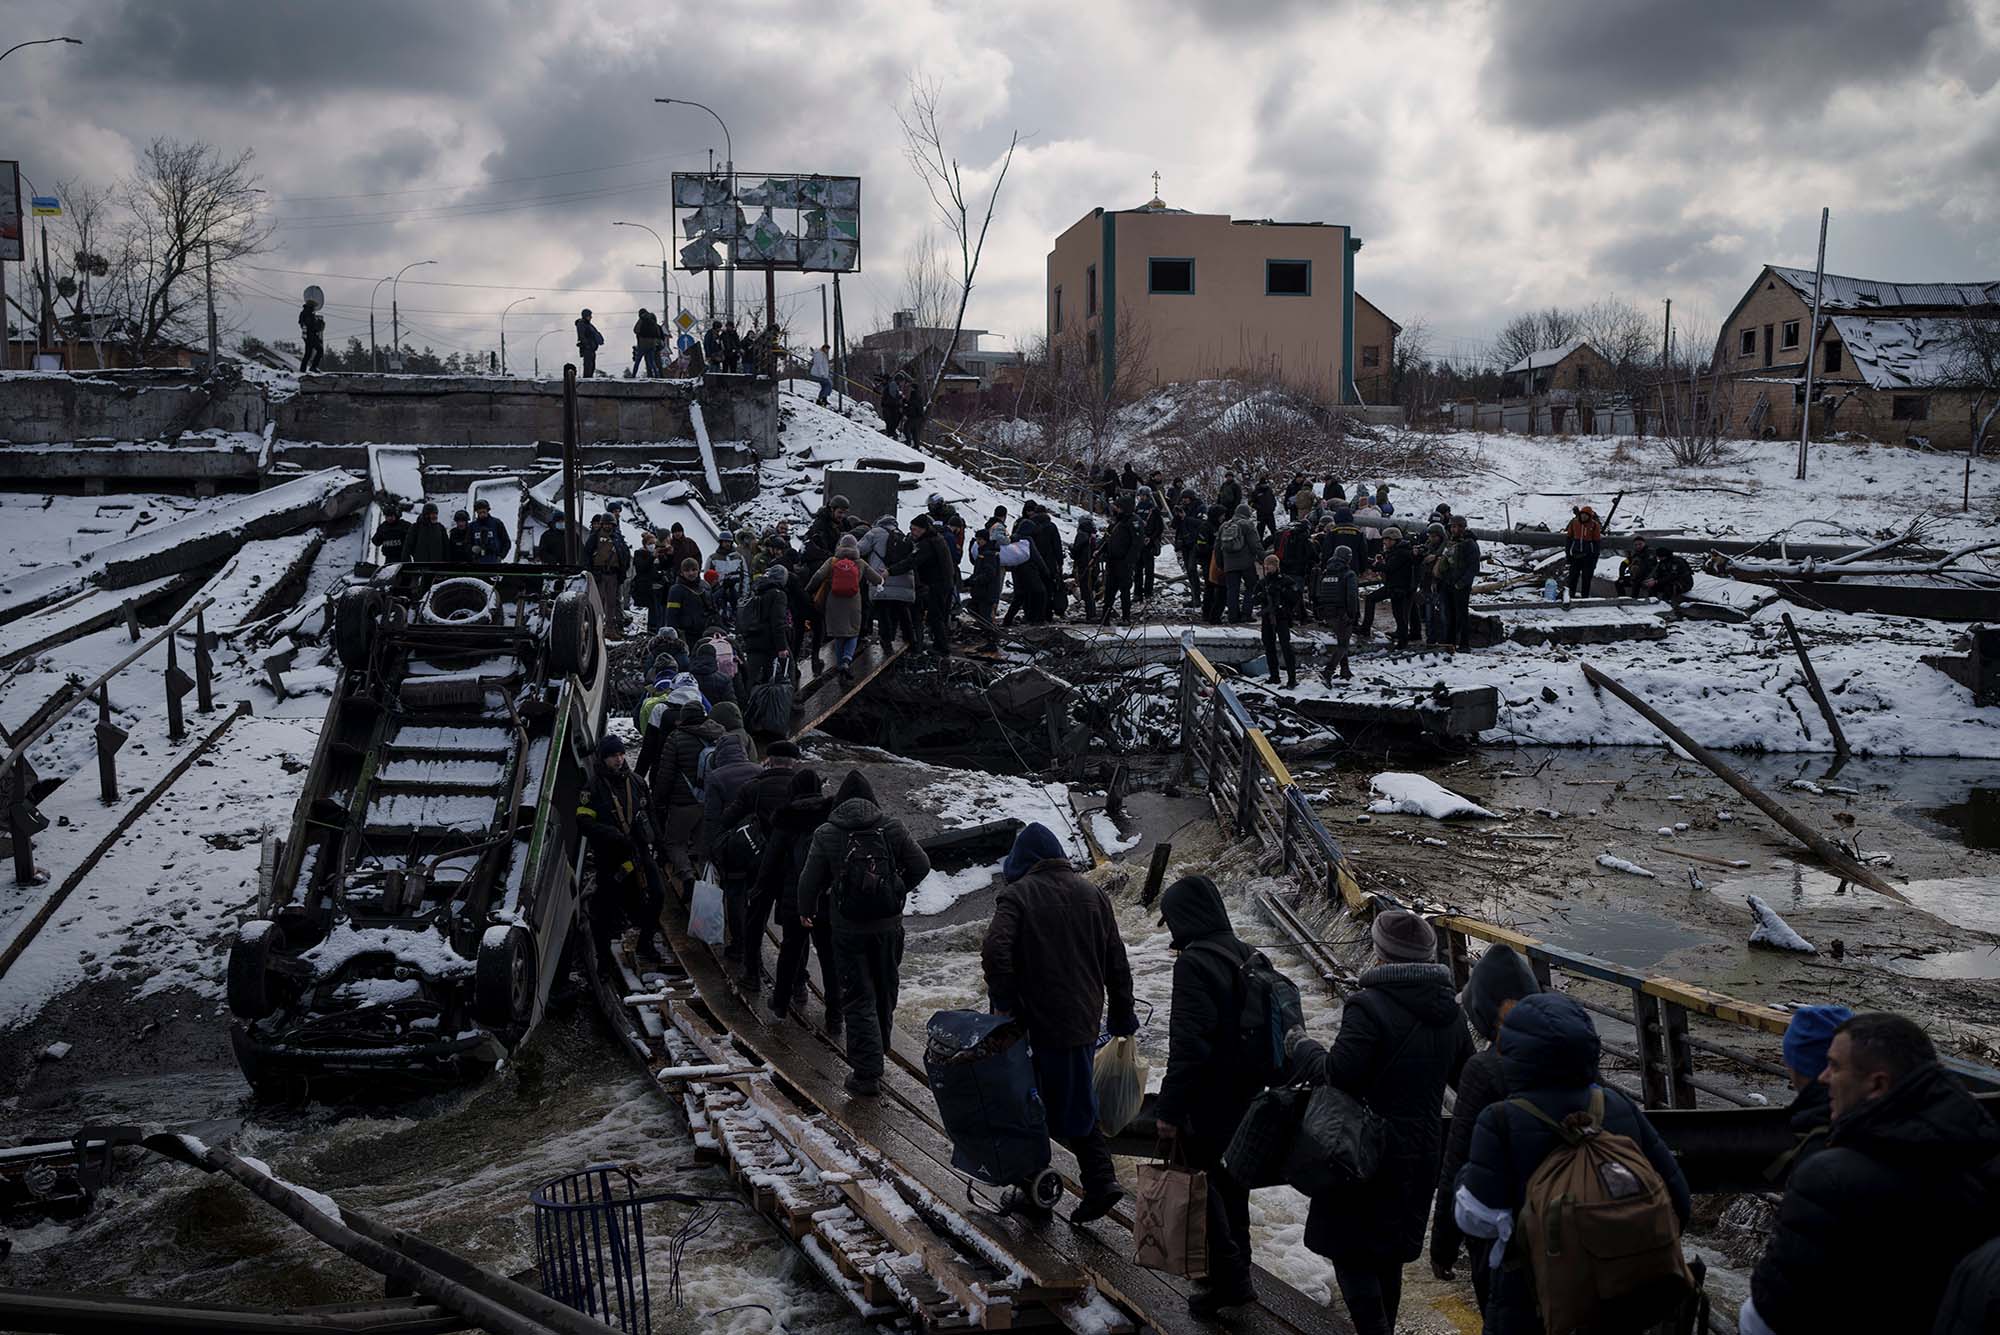 Photo of Ukrainian citizens crossing an improvised path under a destroyed bridge while fleeing Irpin on March 8. Photo shows a line of people wearing dark clothes on a dark snowy day as they follow a path near a destroyed bridge.